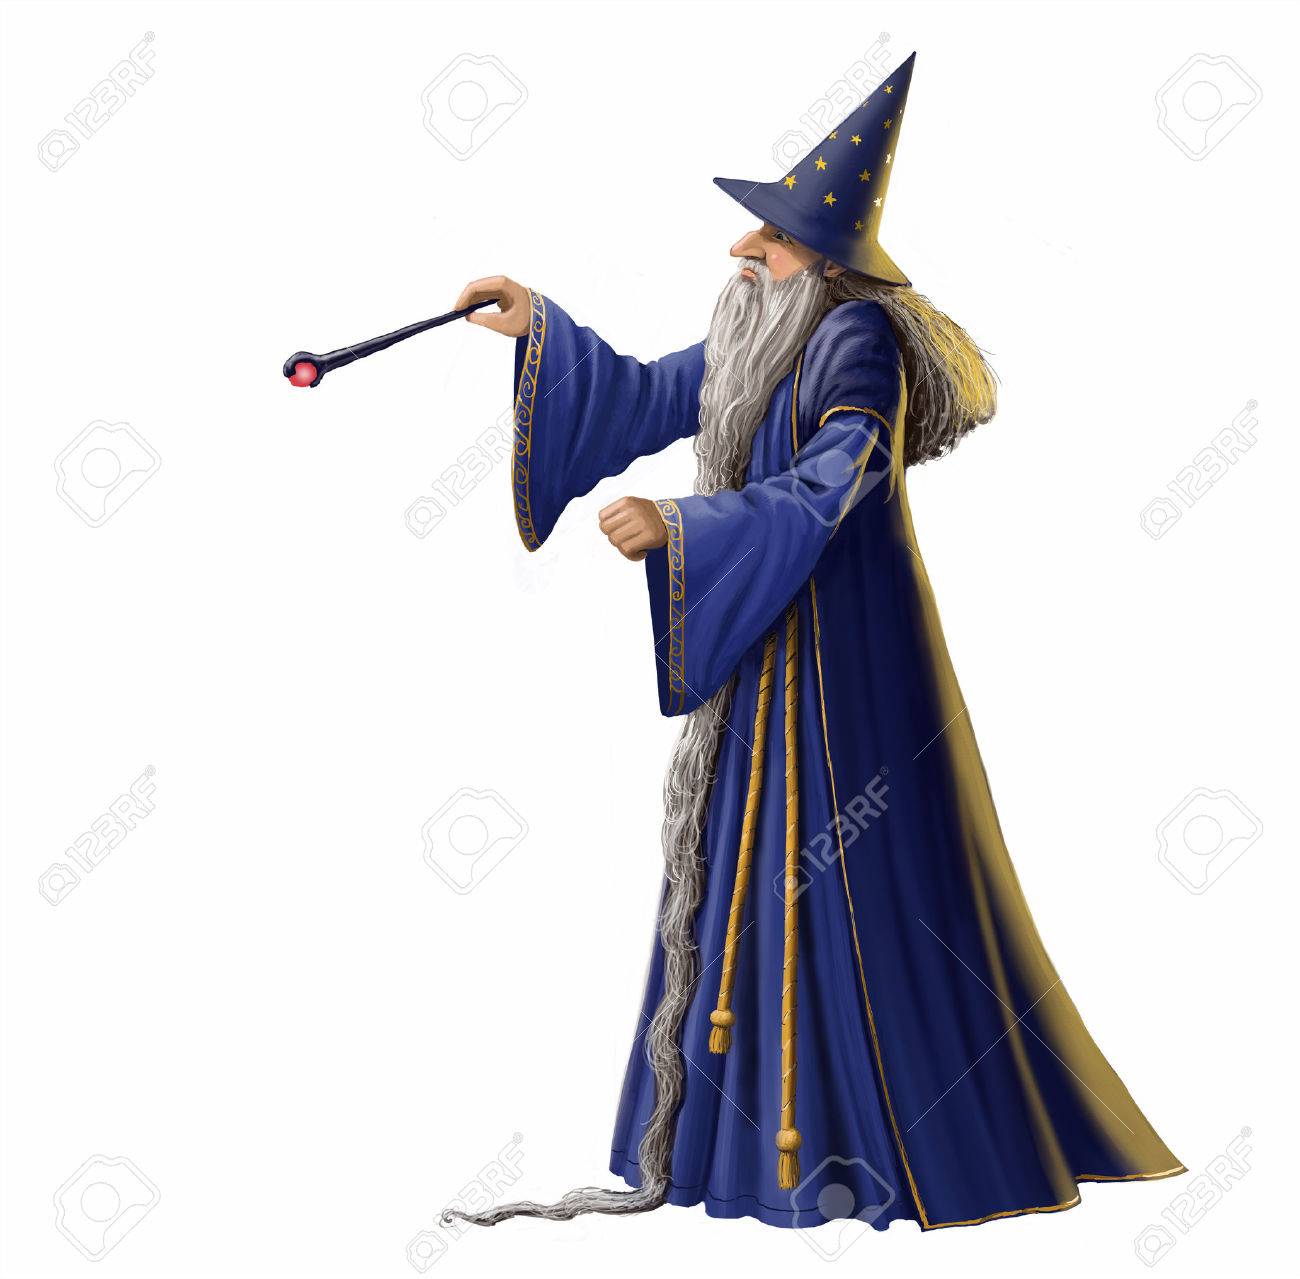 61114413-wizard-and-magic-wand-isolated-on-white-.jpg